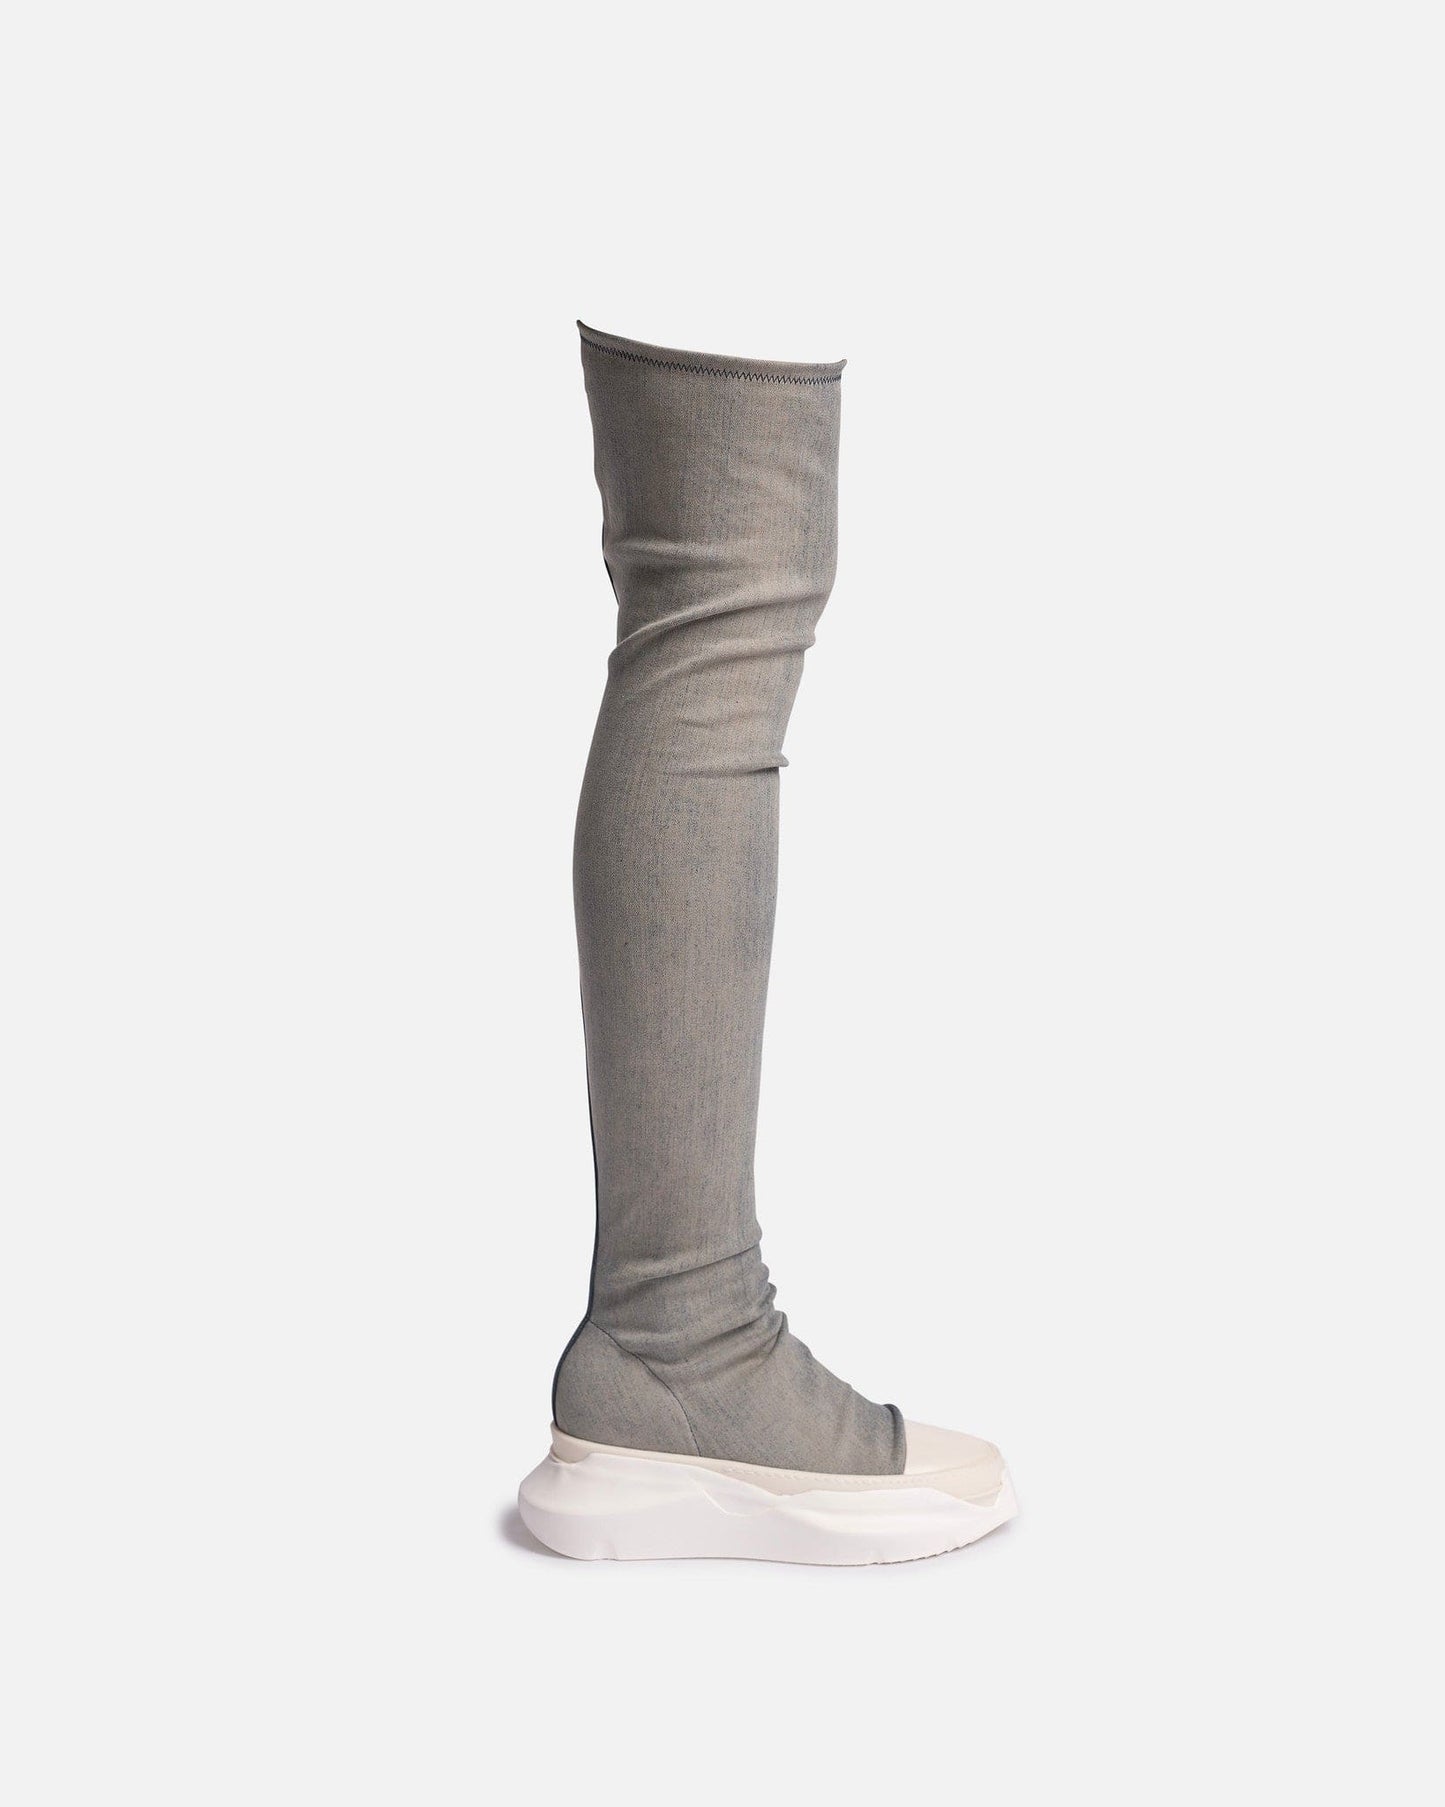 Rick Owens DRKSHDW Women's Shoes Denim Abstract Stockings in Mineral Pearl Degrade/Milk